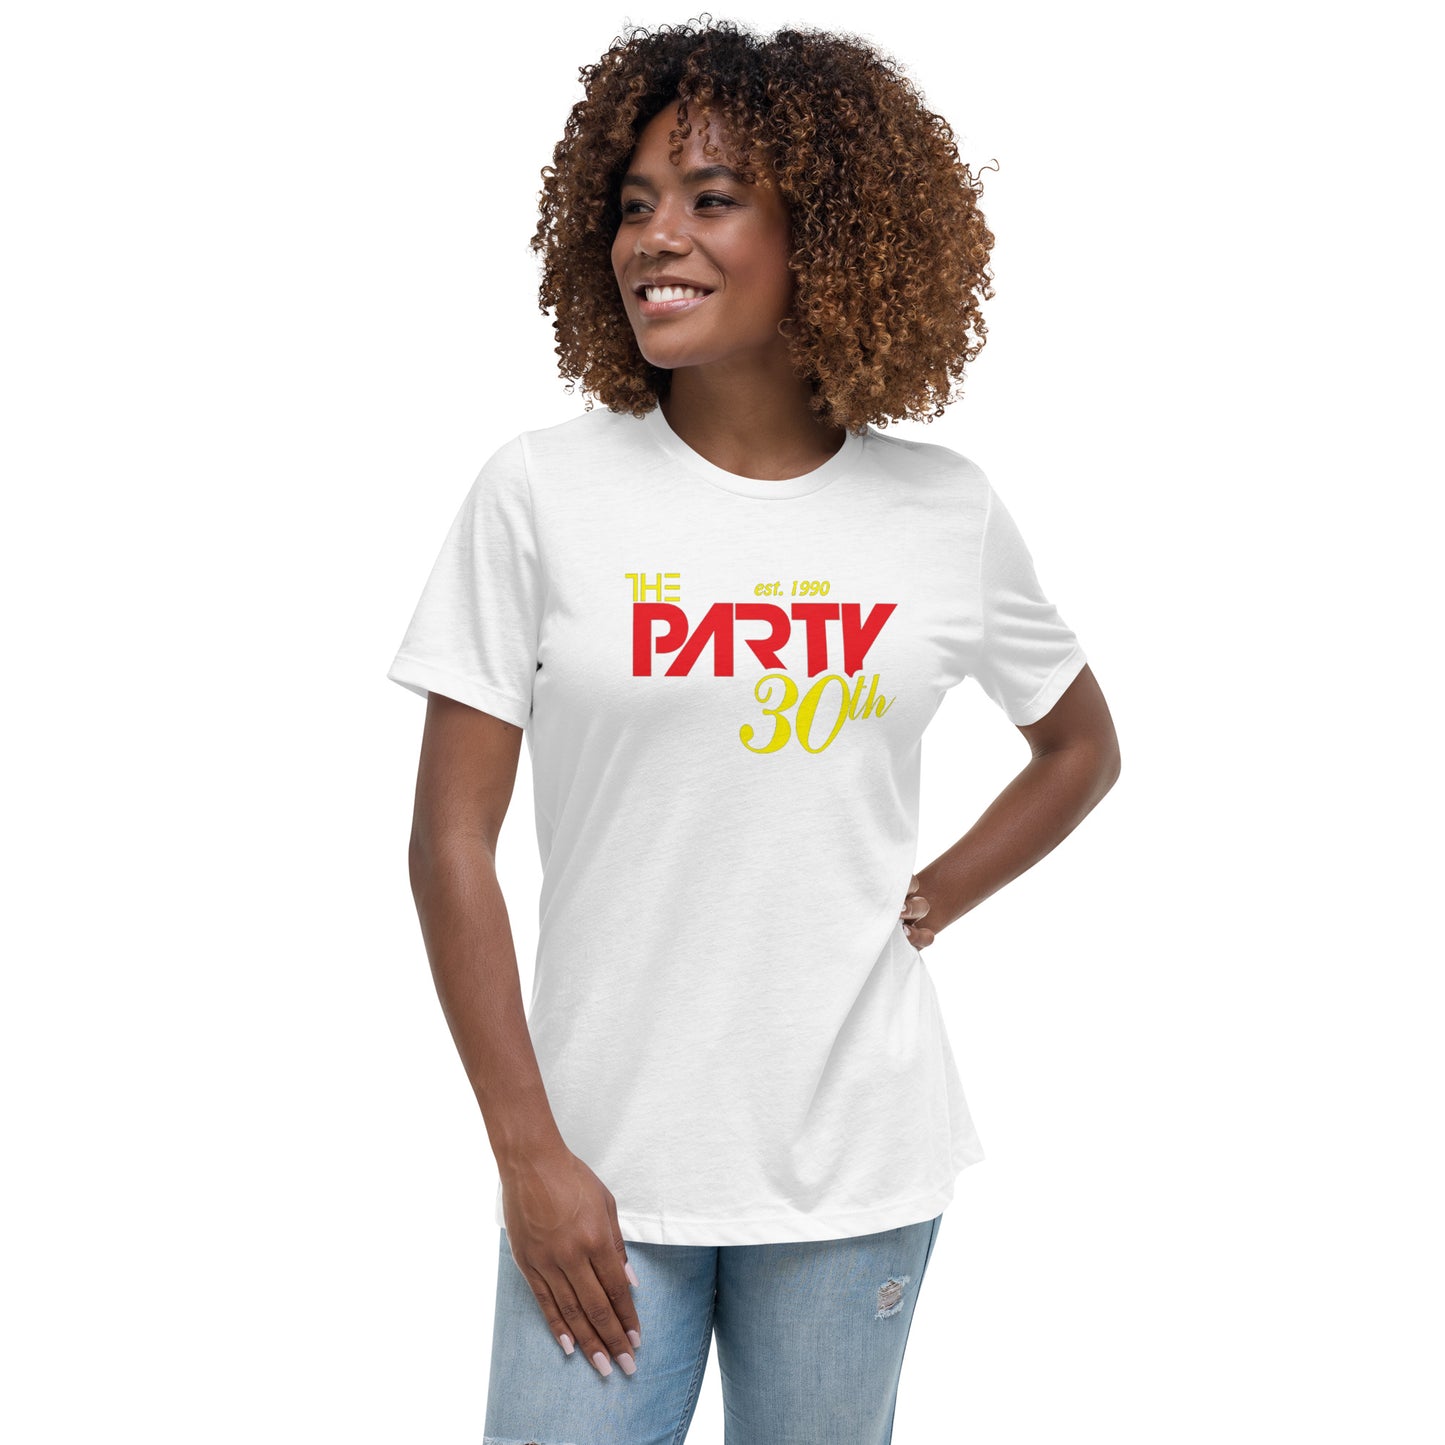 The Party 30th Women's Relaxed T-Shirt - CLUB MEMBER DISCOUNT